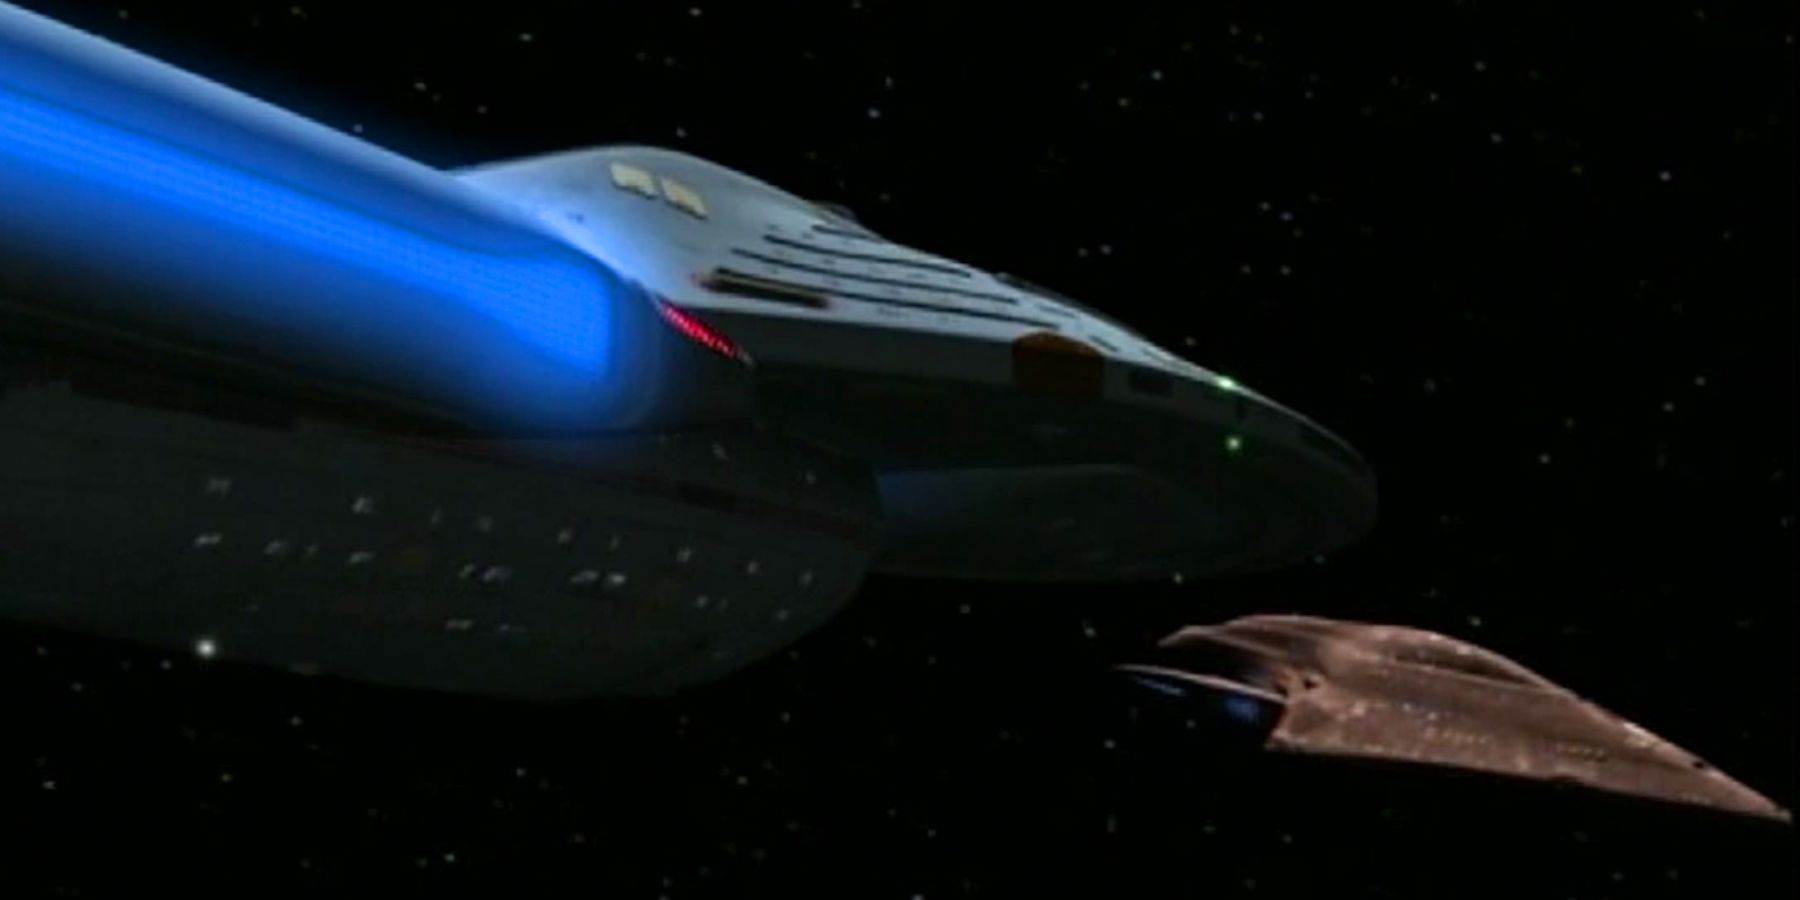 Star Trek Confirms Voyager’s Role In Janeway’s New Ship